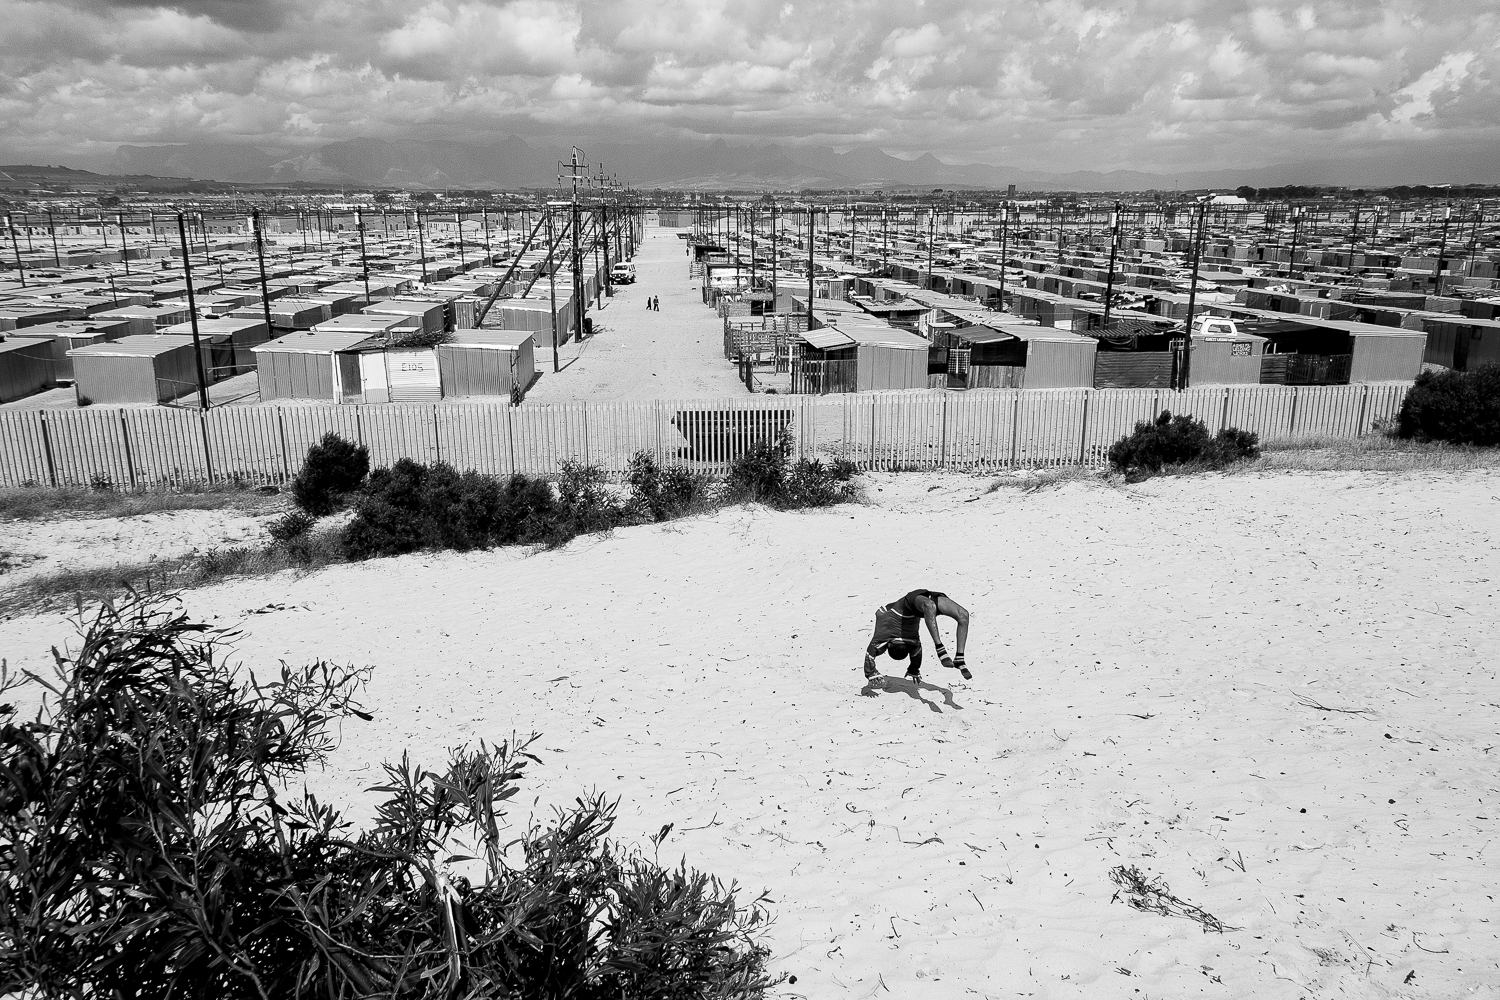 Overlooking one of Western Cape’s temporary housing projects, Blikkiesdorp, 2010.